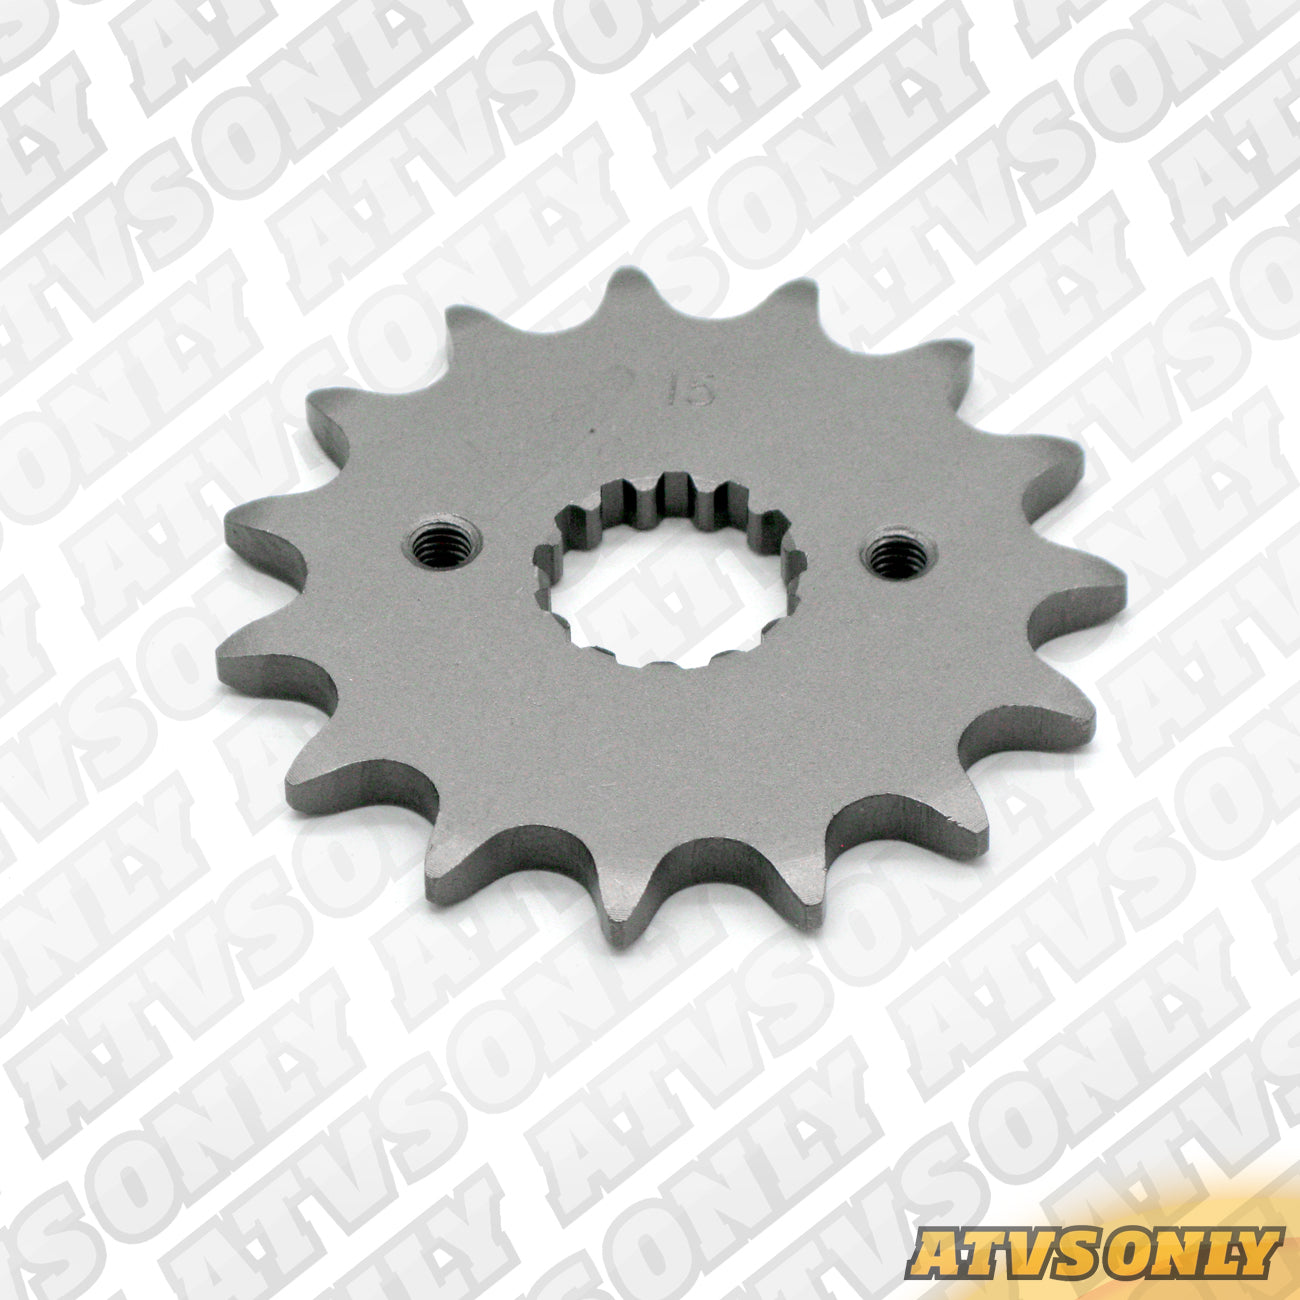 Front Sprockets for Yamaha YFZ450 ’04-’13